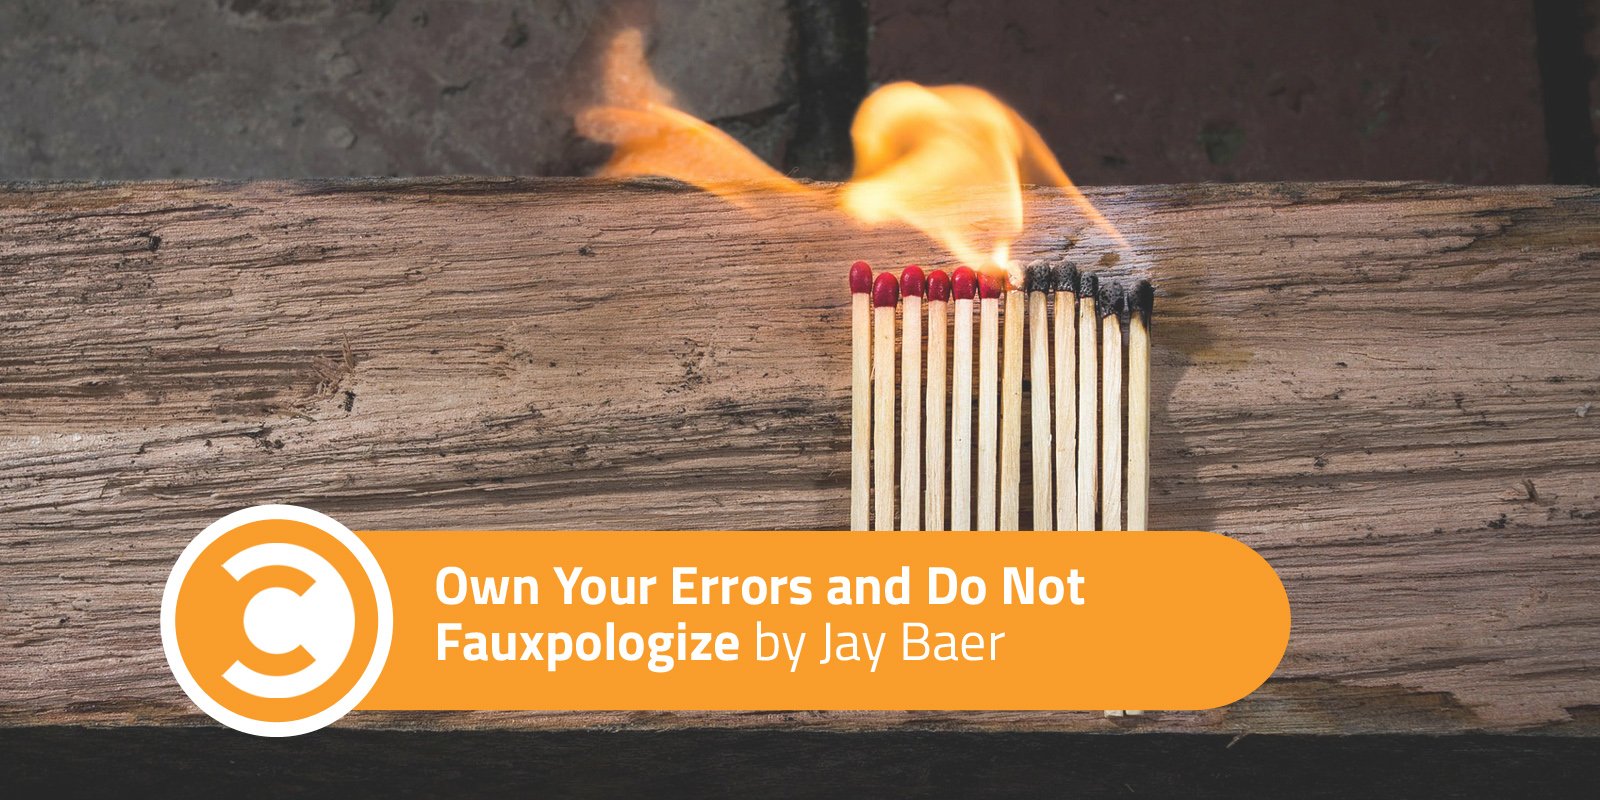 Own Your Errors and Do Not Fauxpologize